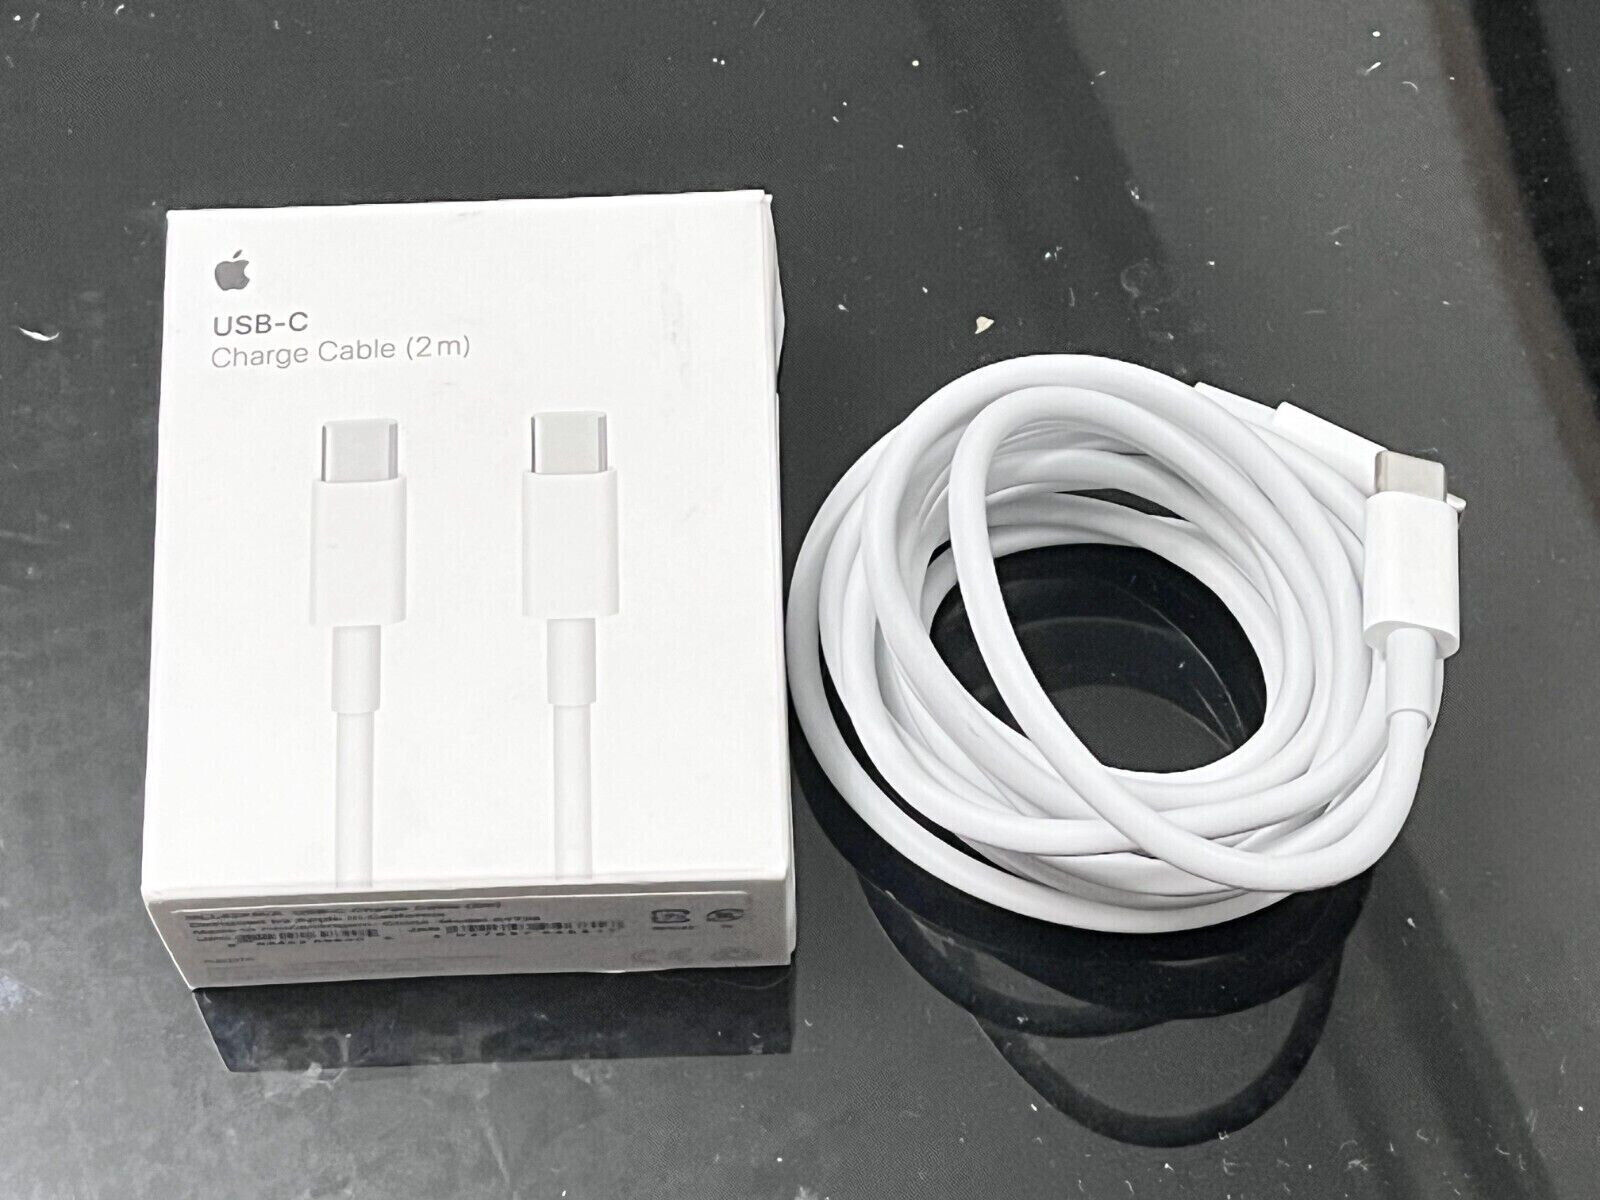 Genuine Apple USB-C Charge Cable (2m) MLL82AM/A Model A1739 - Original